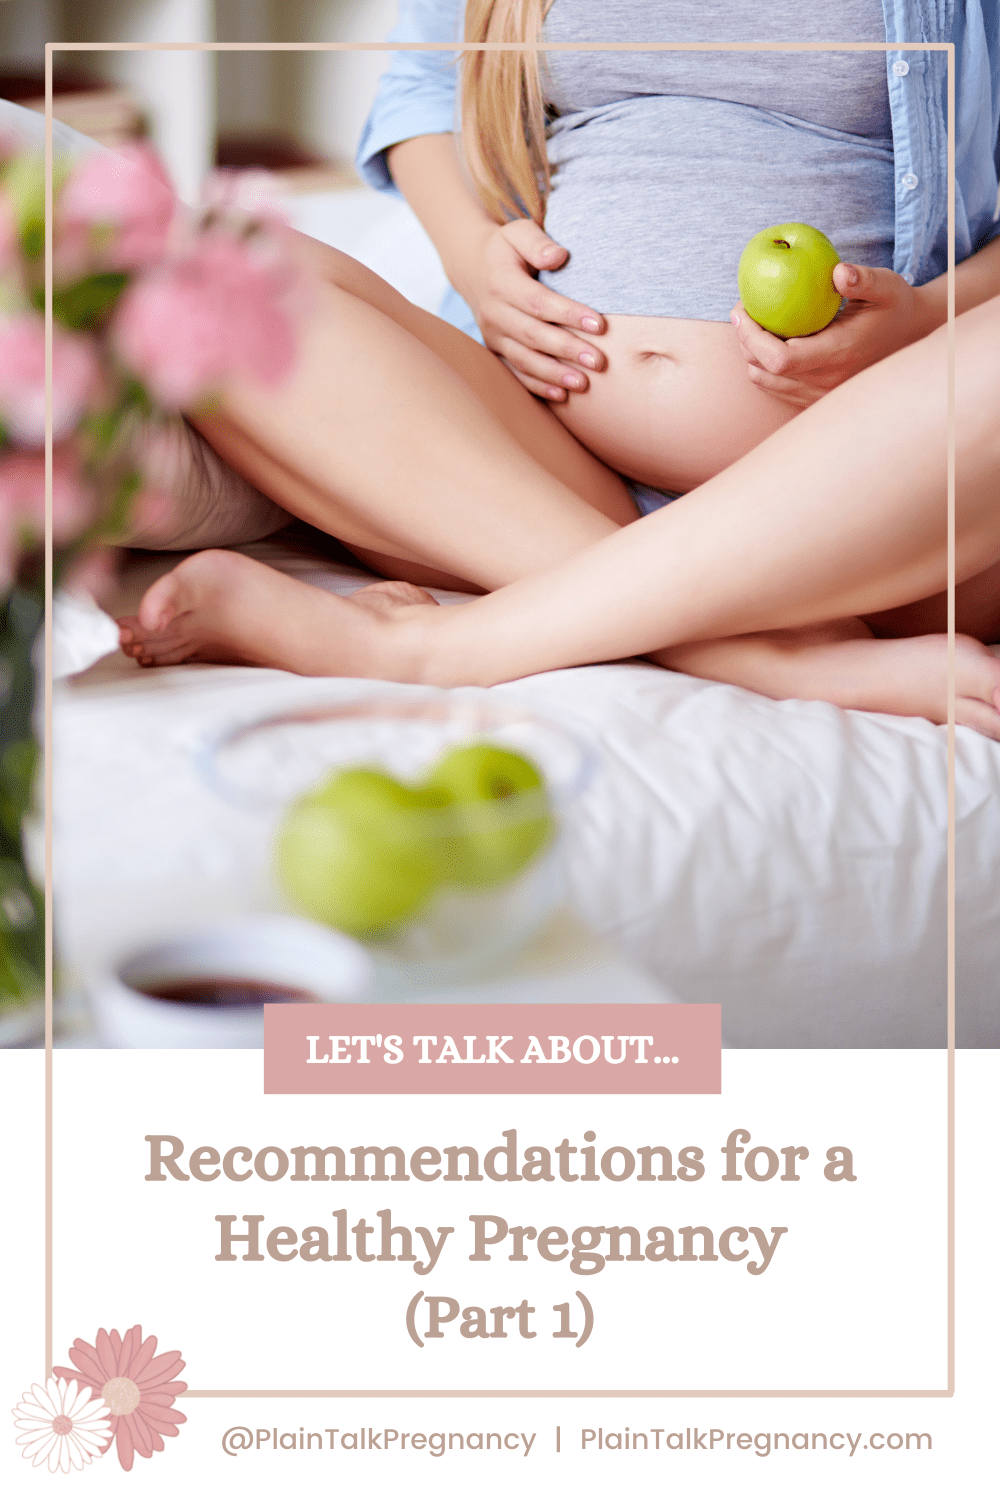 Let's talk about Recommendations for a Healthy Pregnancy - PlainTalkPregnancy.com